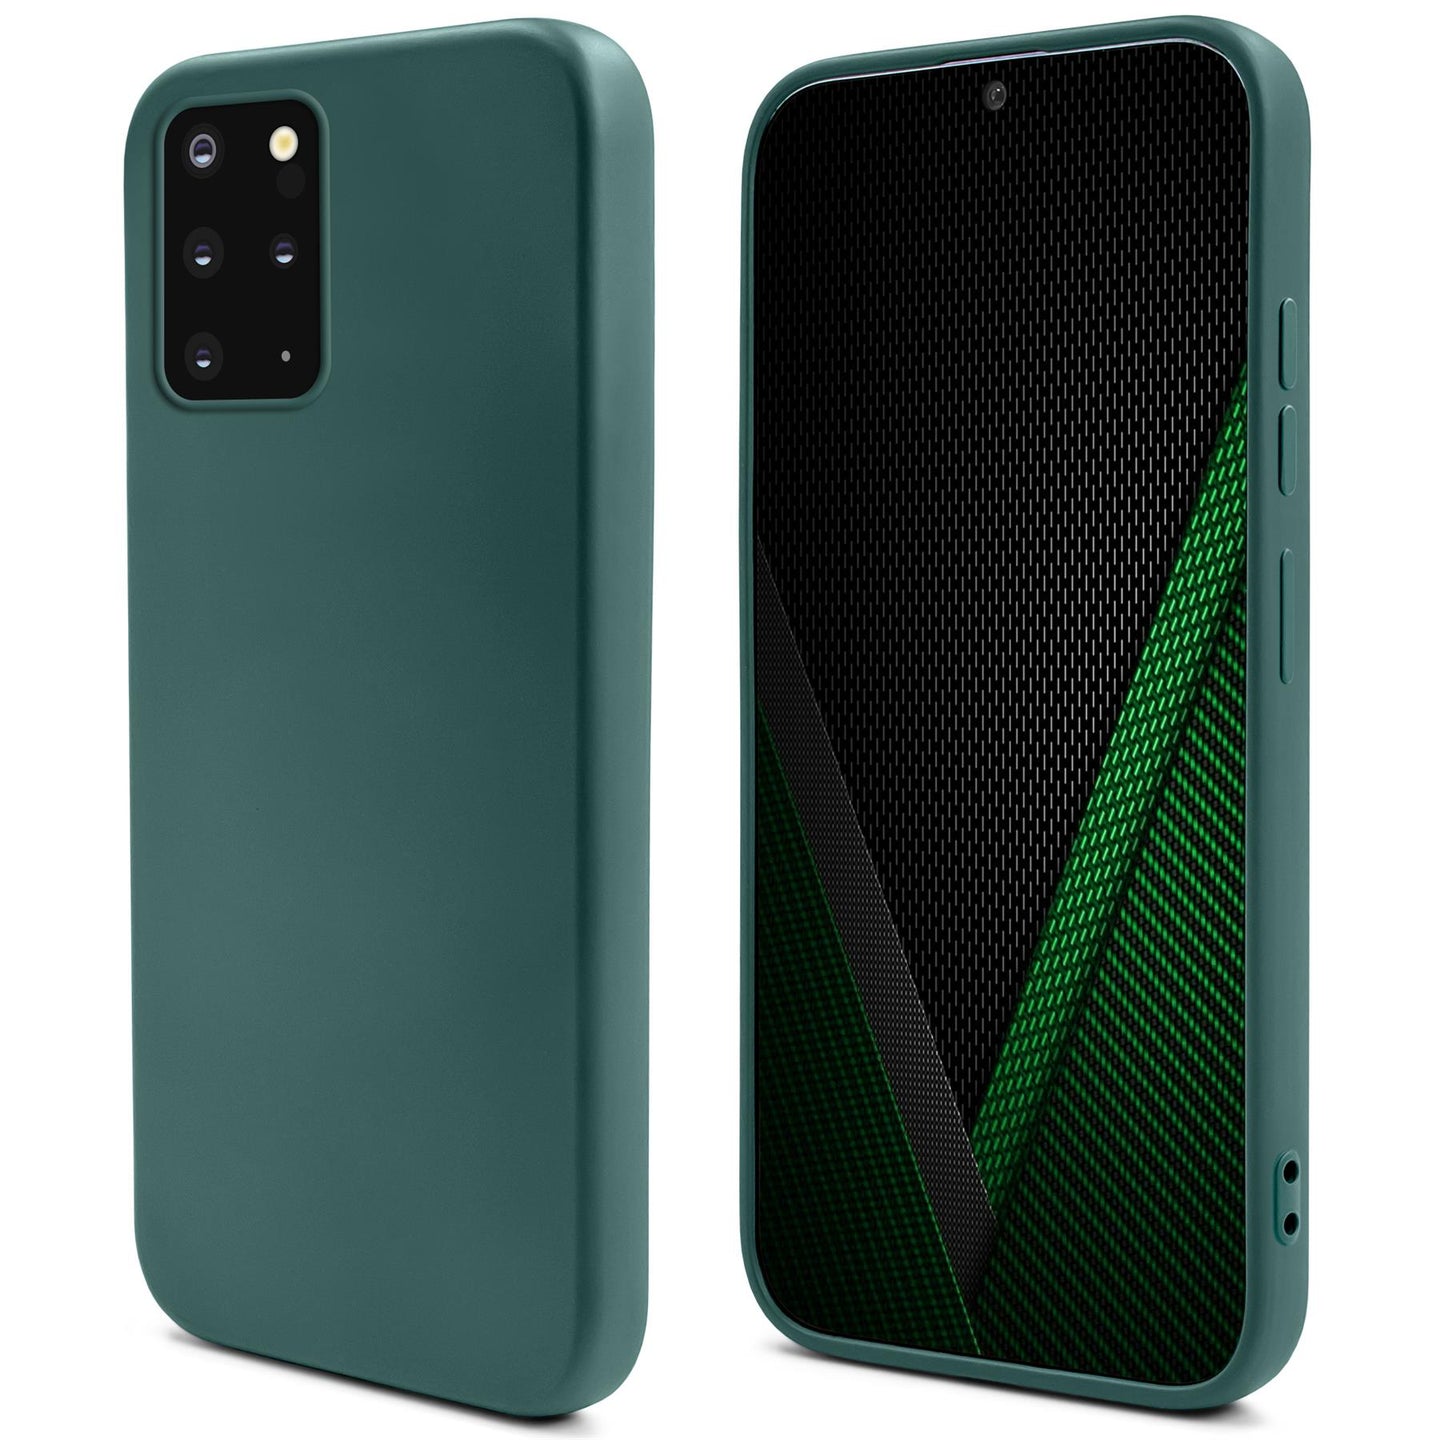 Moozy Lifestyle. Silicone Case for Samsung S20 Plus, Dark Green - Liquid Silicone Lightweight Cover with Matte Finish and Soft Microfiber Lining, Premium Silicone Case